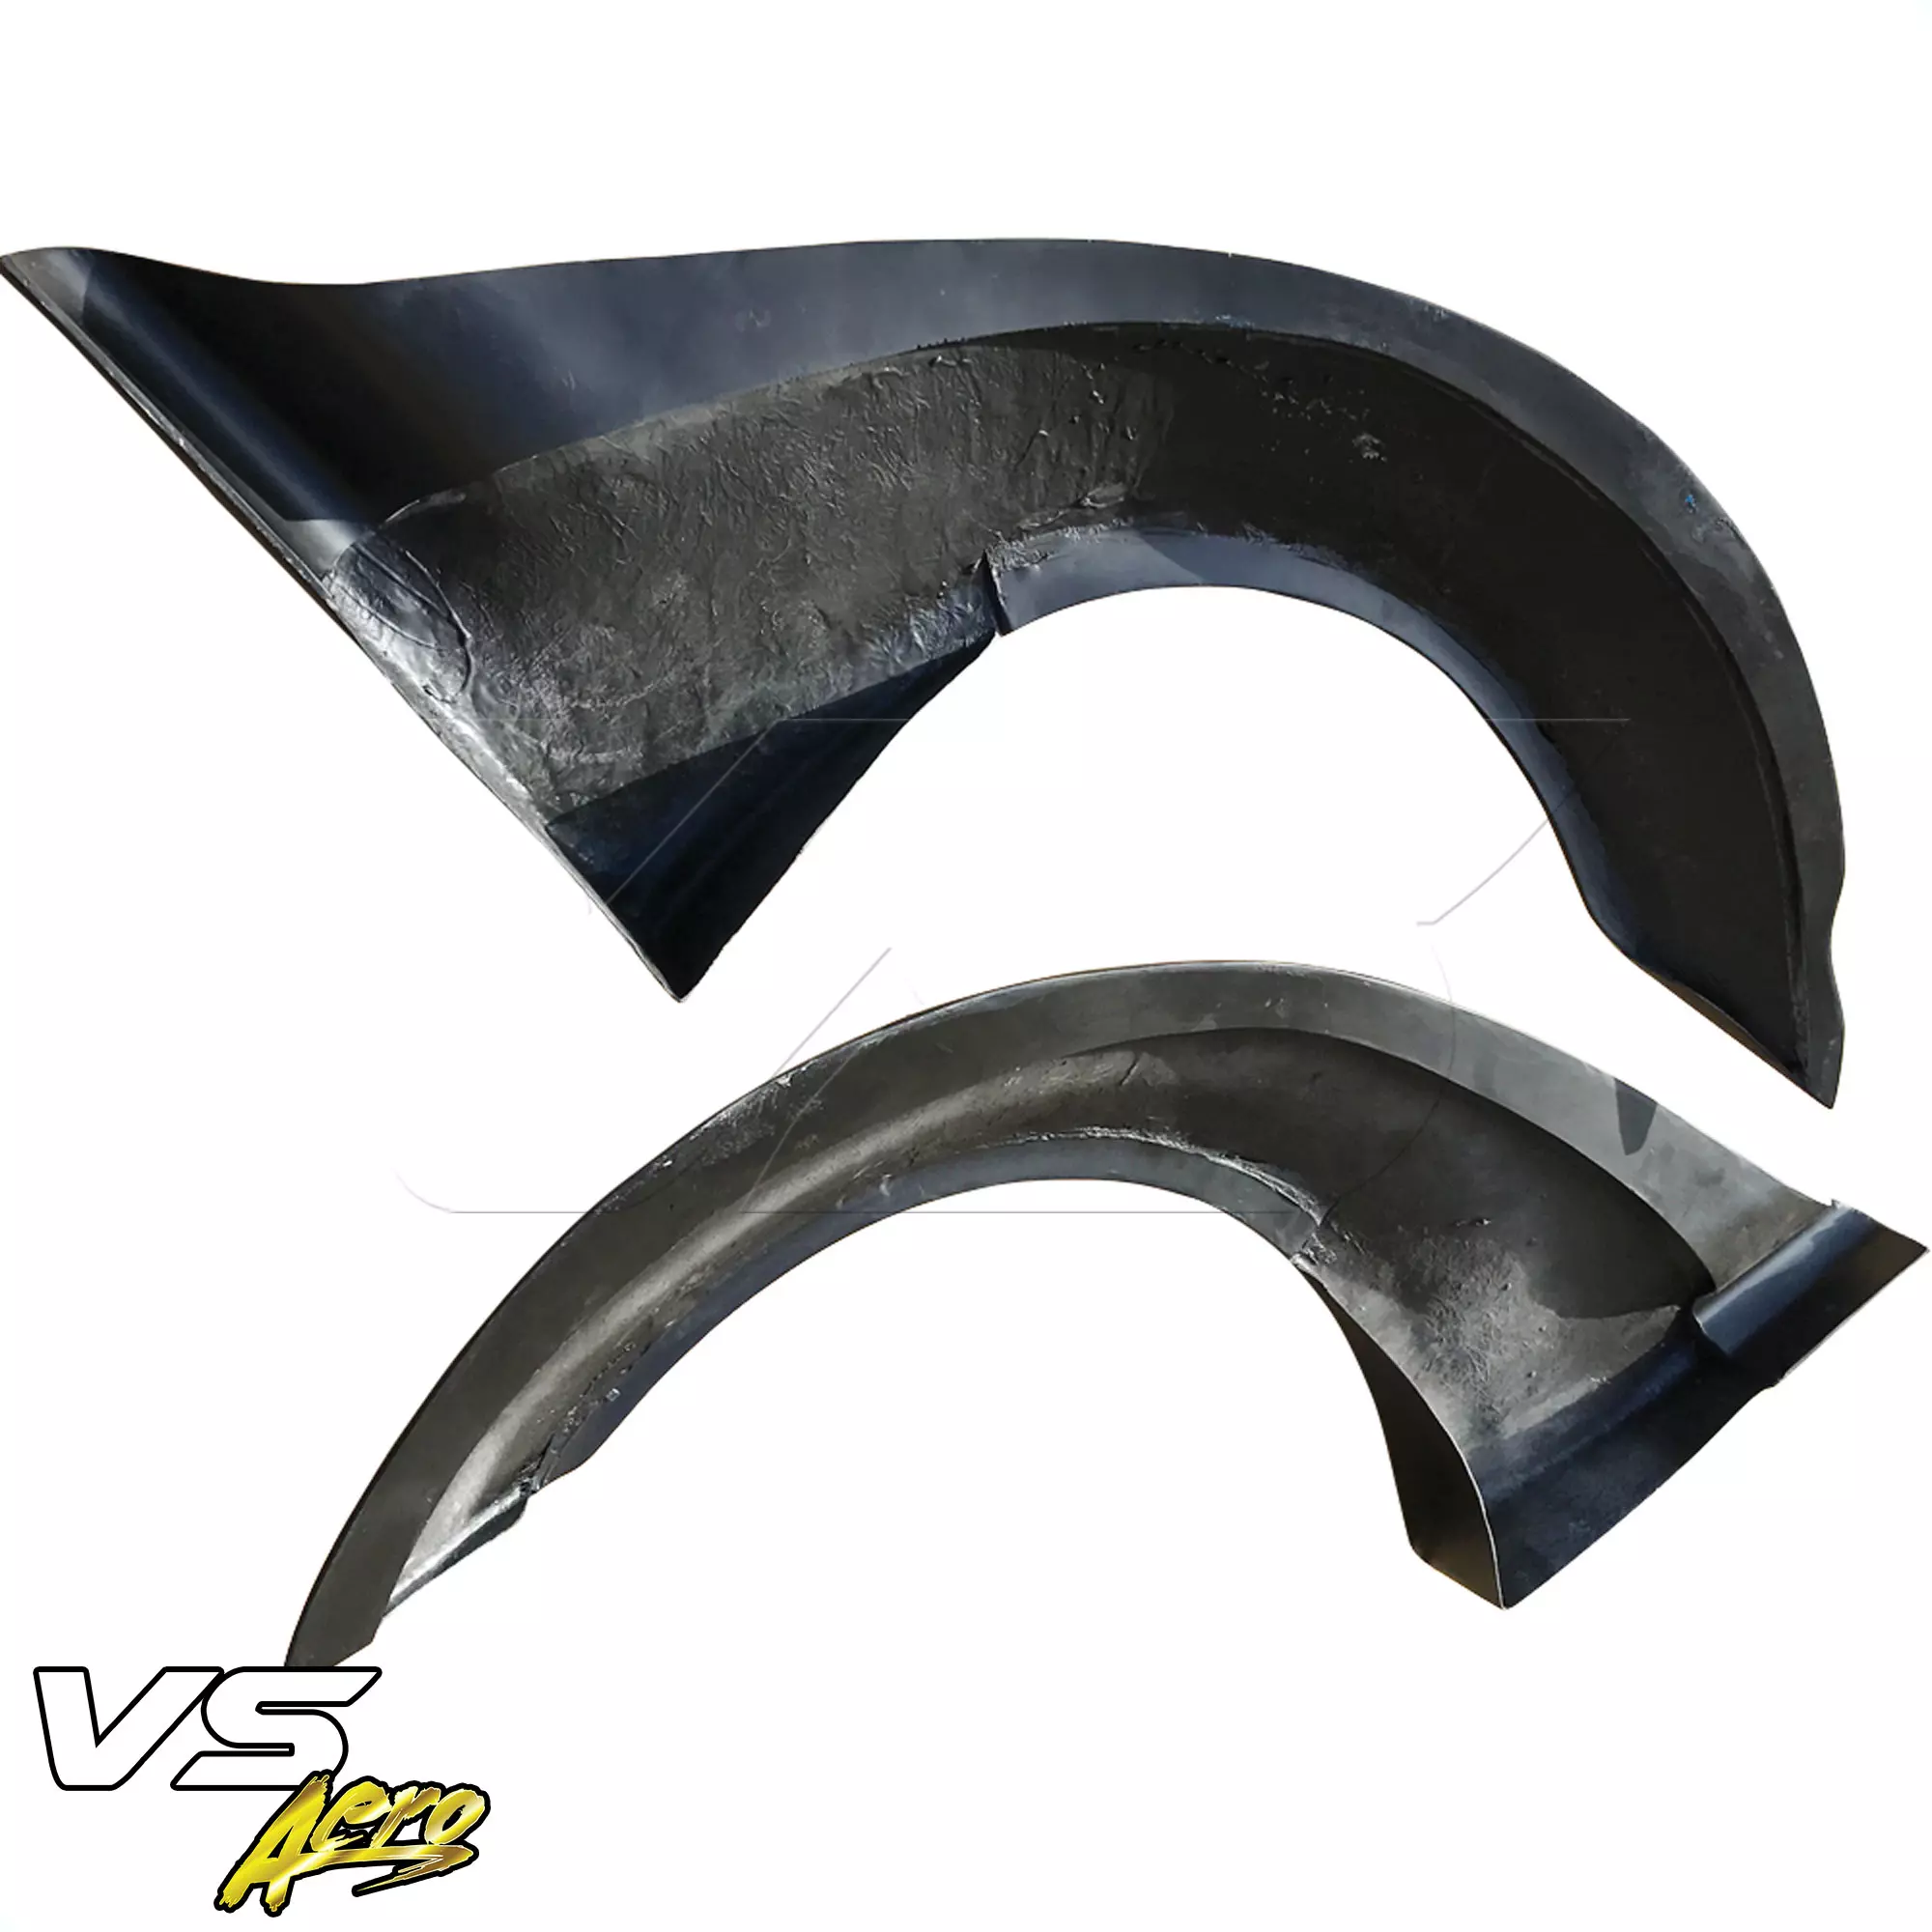 VSaero FRP LBPE Wide Body Fender Flares (rear) 4pc > Infiniti G37 Coupe 2008-2015 > 2dr Coupe - Image 22